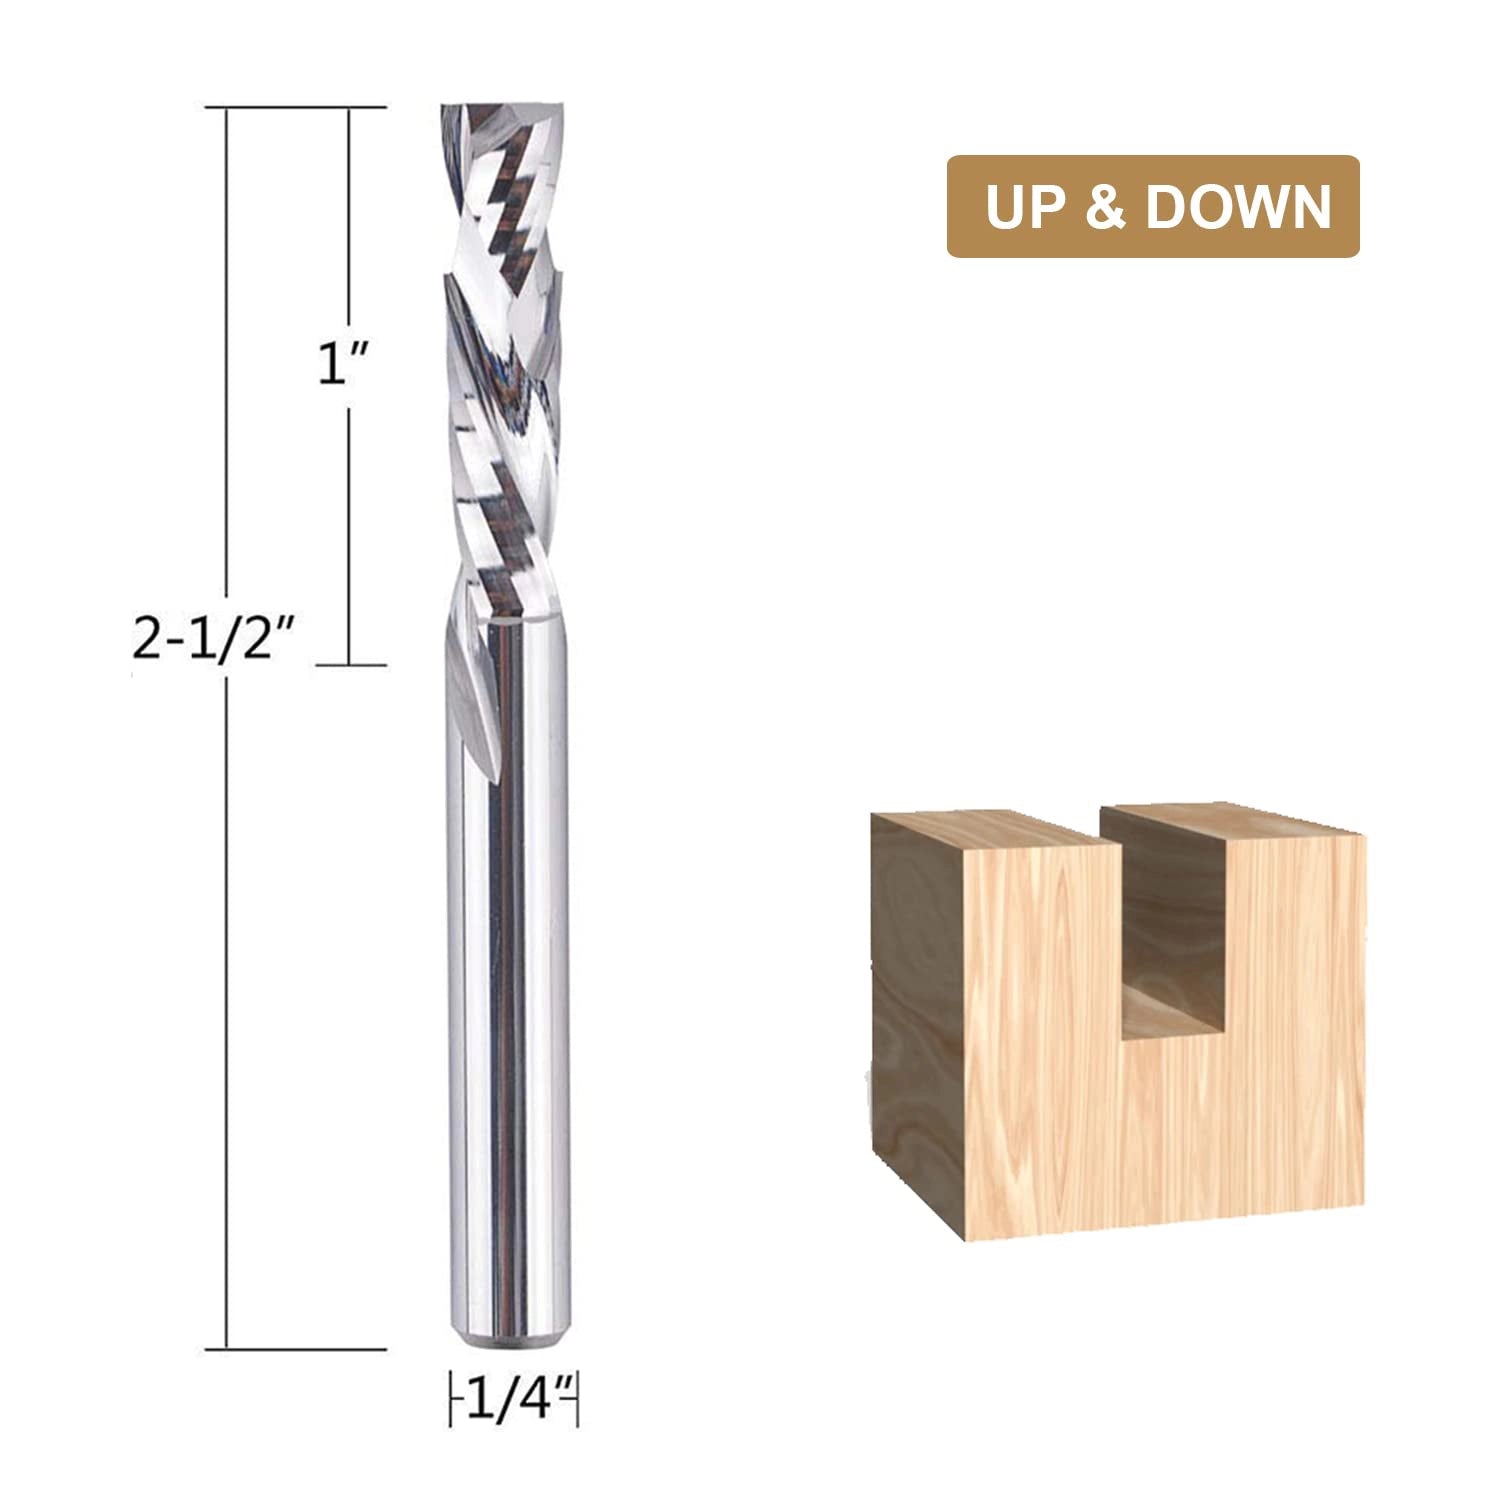 SpeTool 1/4" Dia Spiral Carbide UP&DOWN Cut Router Bit For Woodworking 